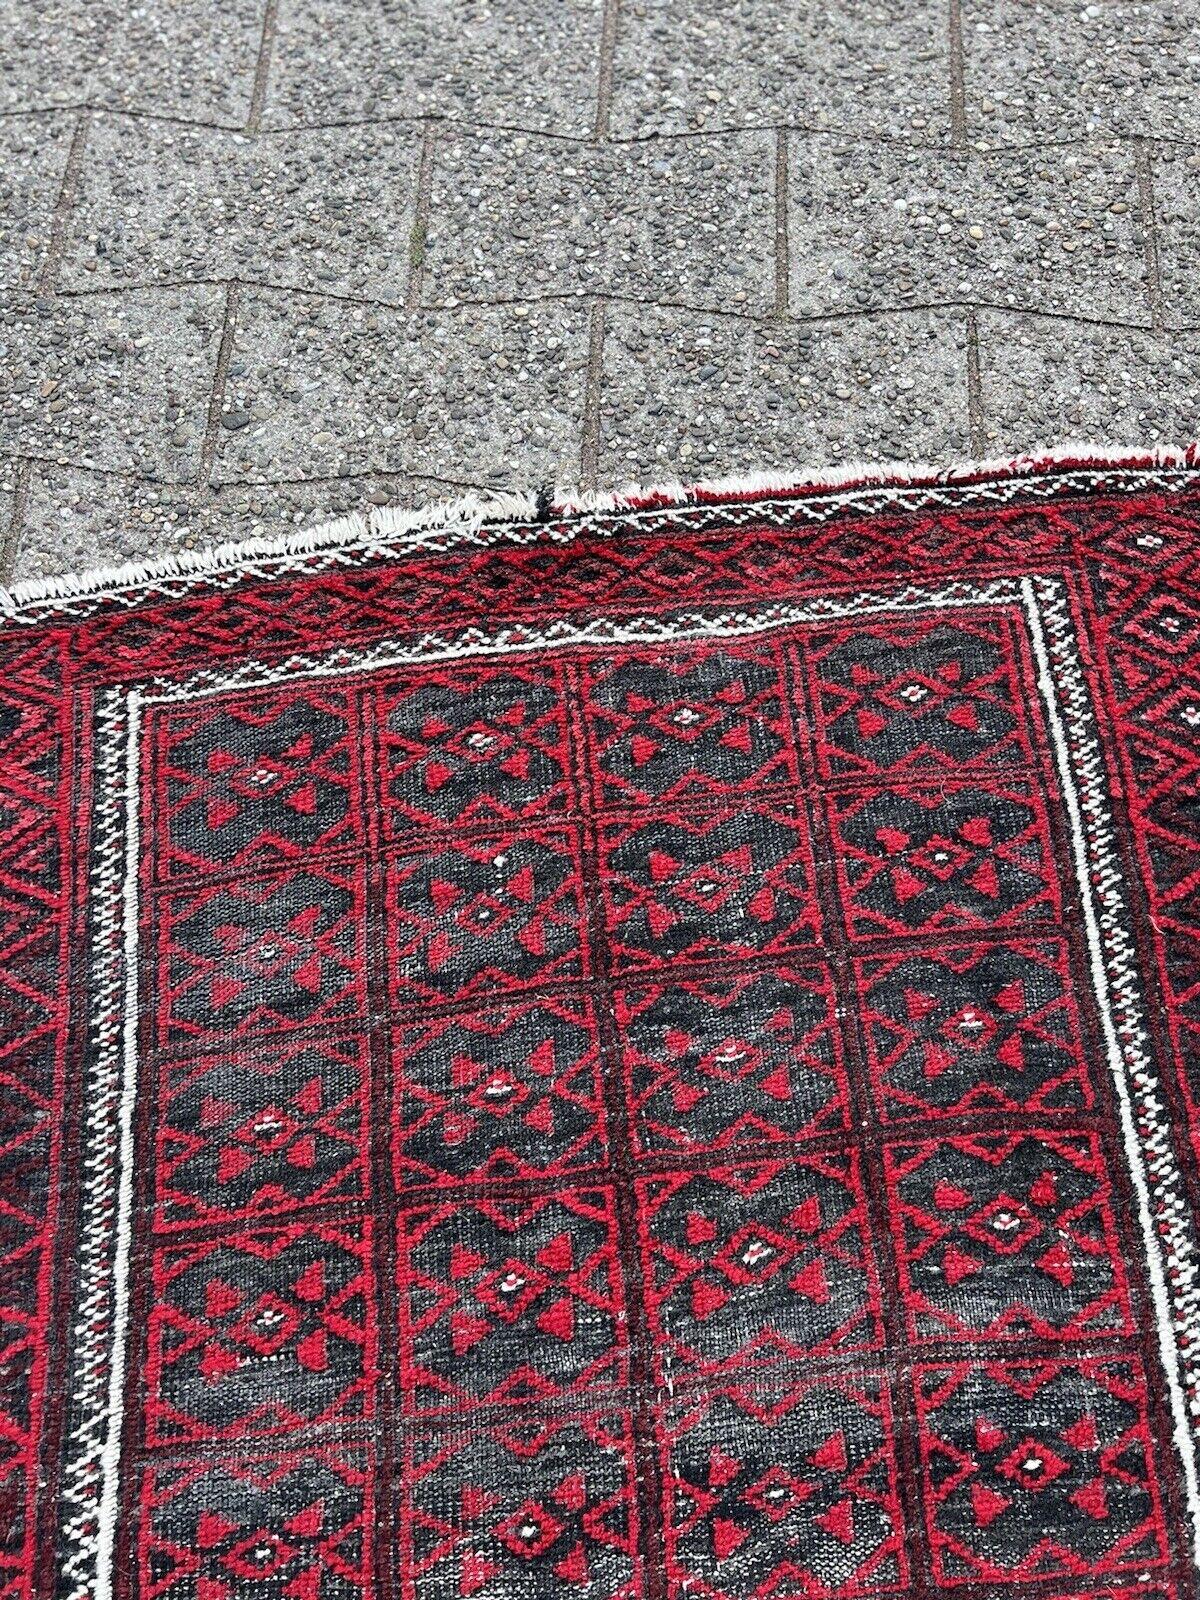 Handmade Vintage Afghan Baluch Rug 2.9' x 5.3', 1960s - 1S32 In Good Condition For Sale In Bordeaux, FR